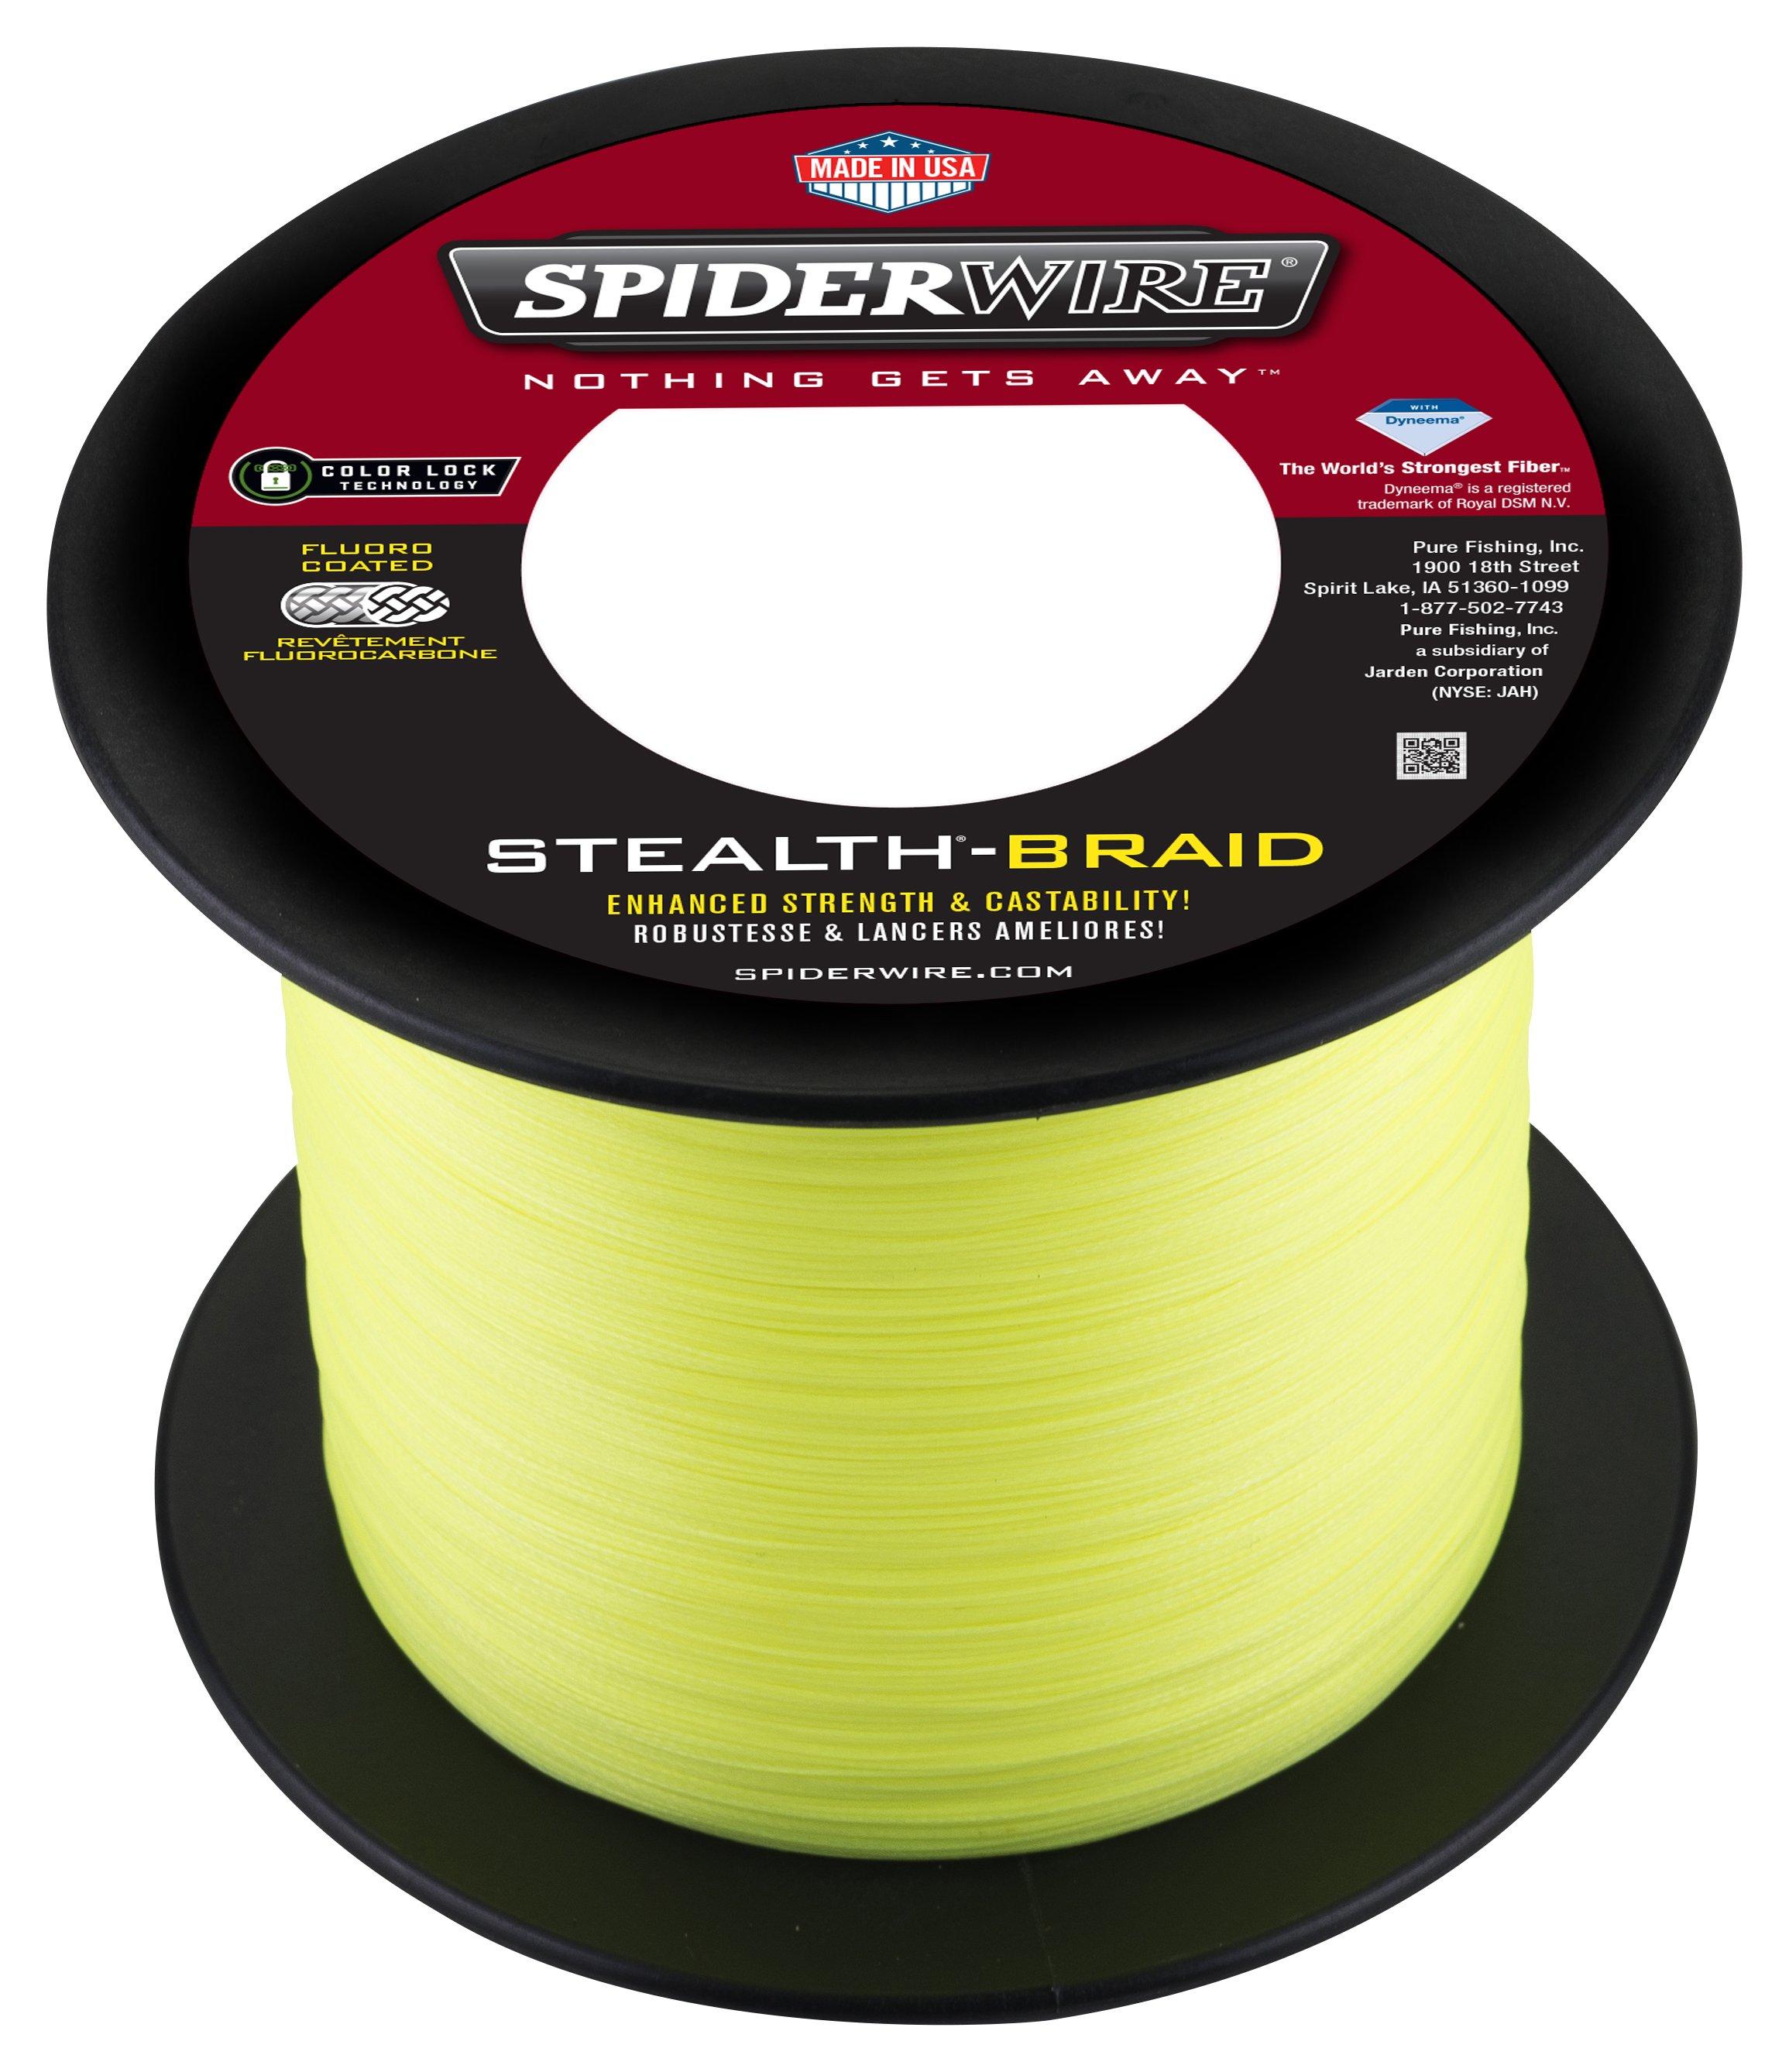 Spiderwire Stealth Smooth 8 Code Red Braided 150m All Sizes Fishing Line 